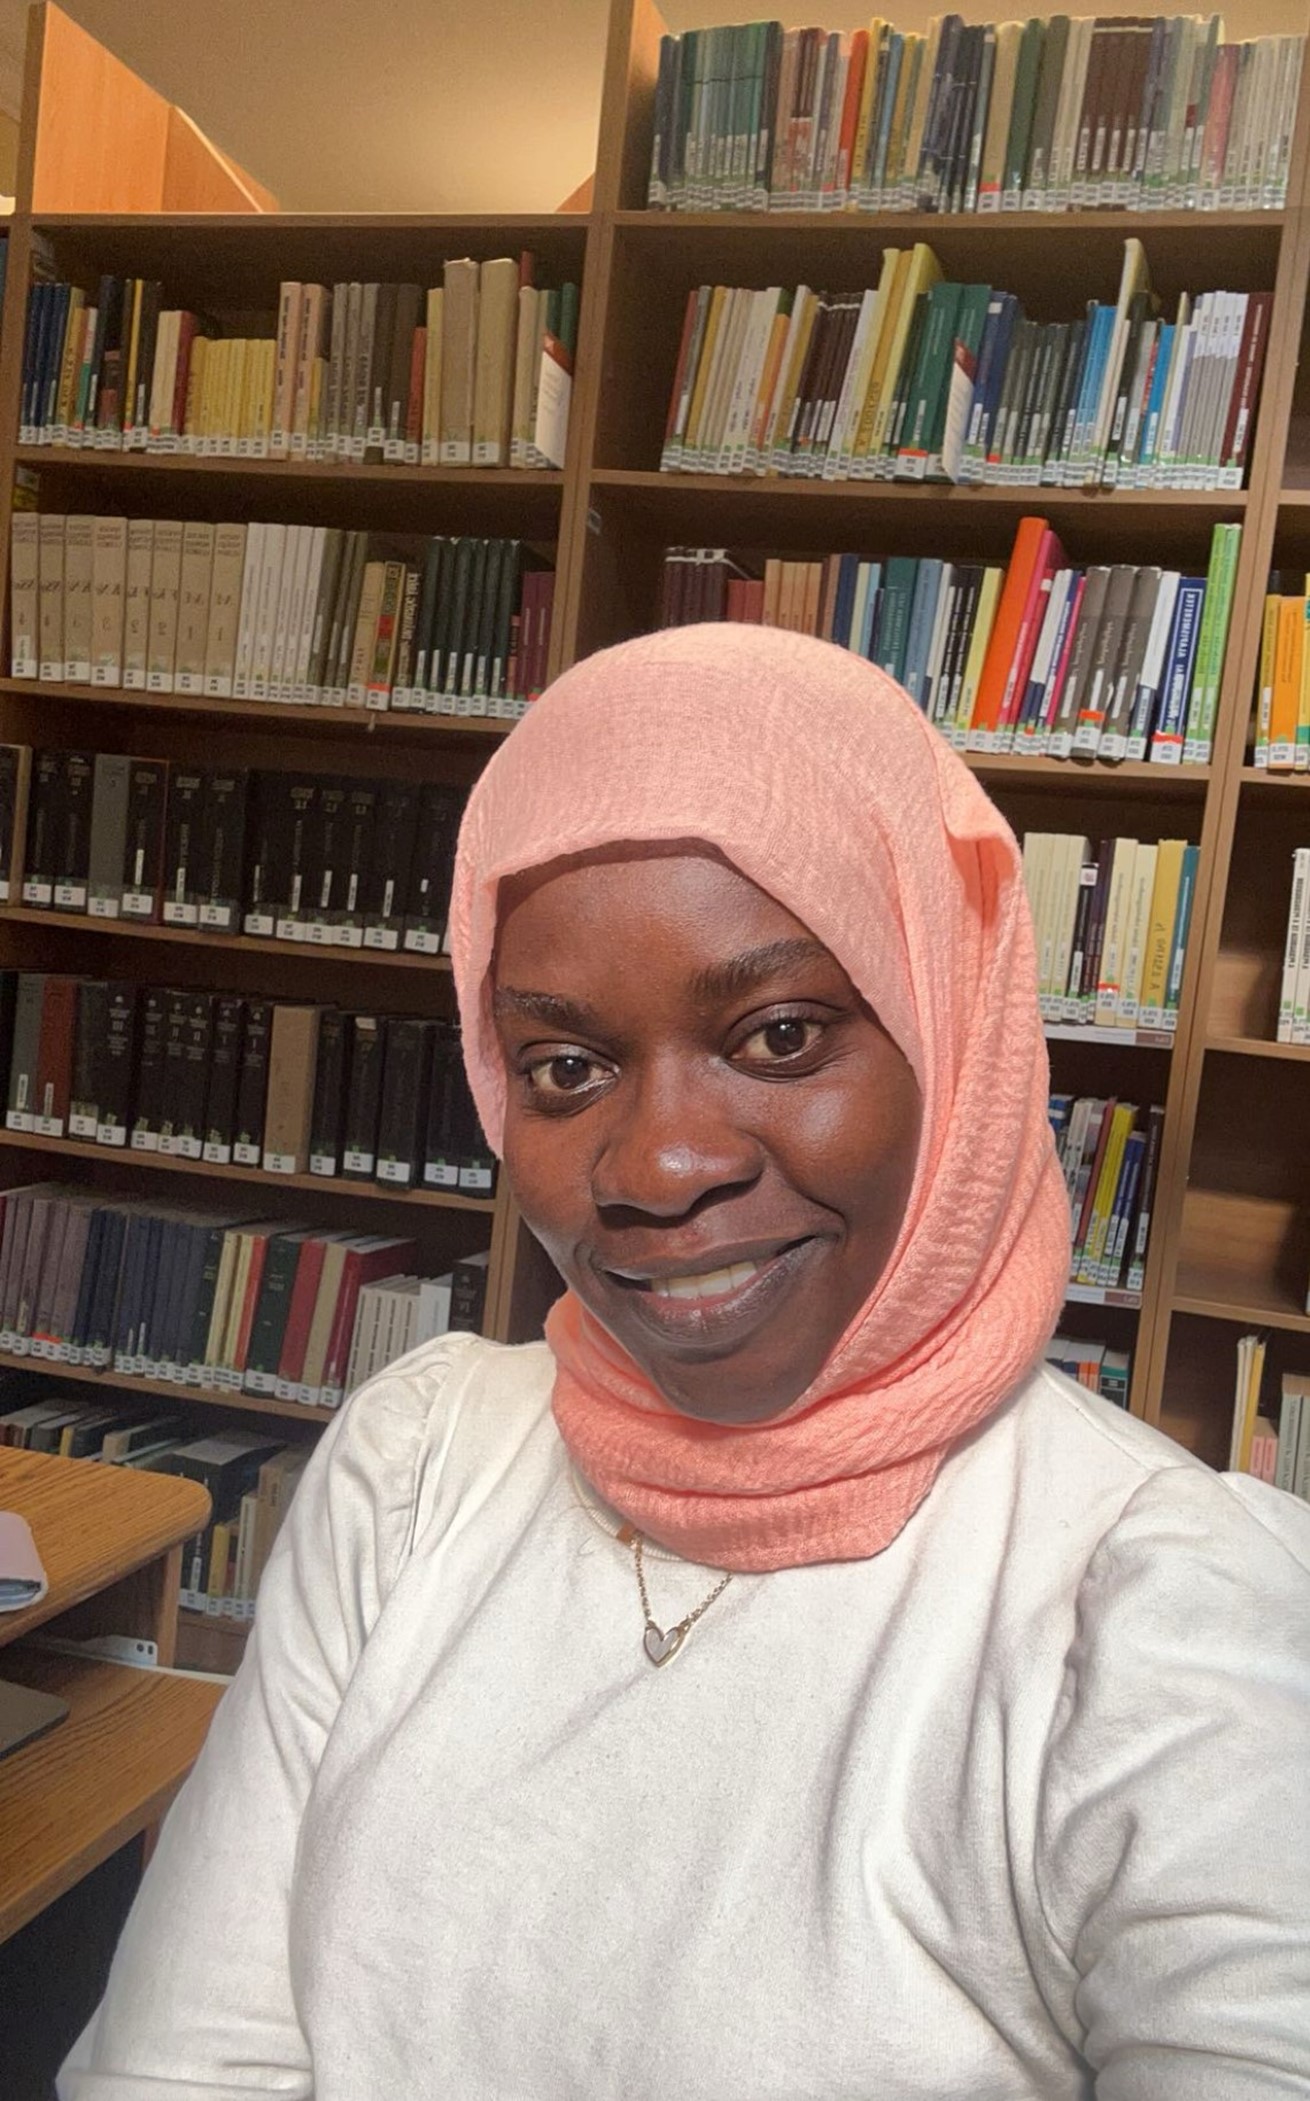 Photo of Nafisa wearing a pink headscarf and white top, smiling at the camera, with many shelves of books in the background.